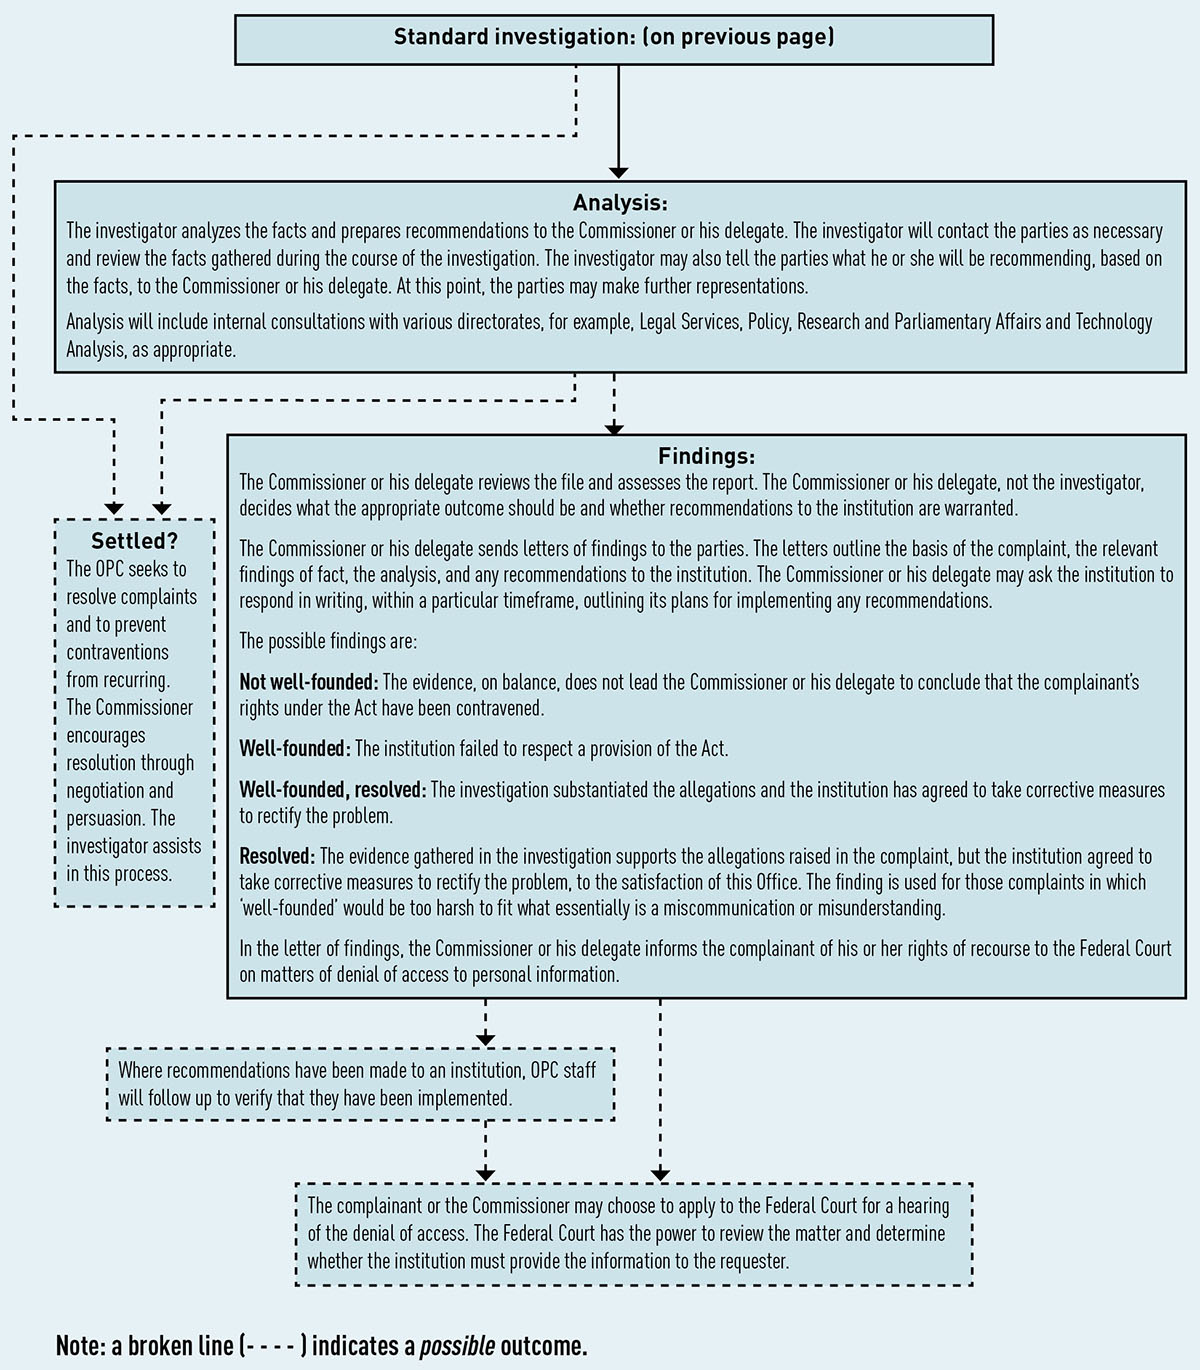 Figure 4: Privacy Act investigation process